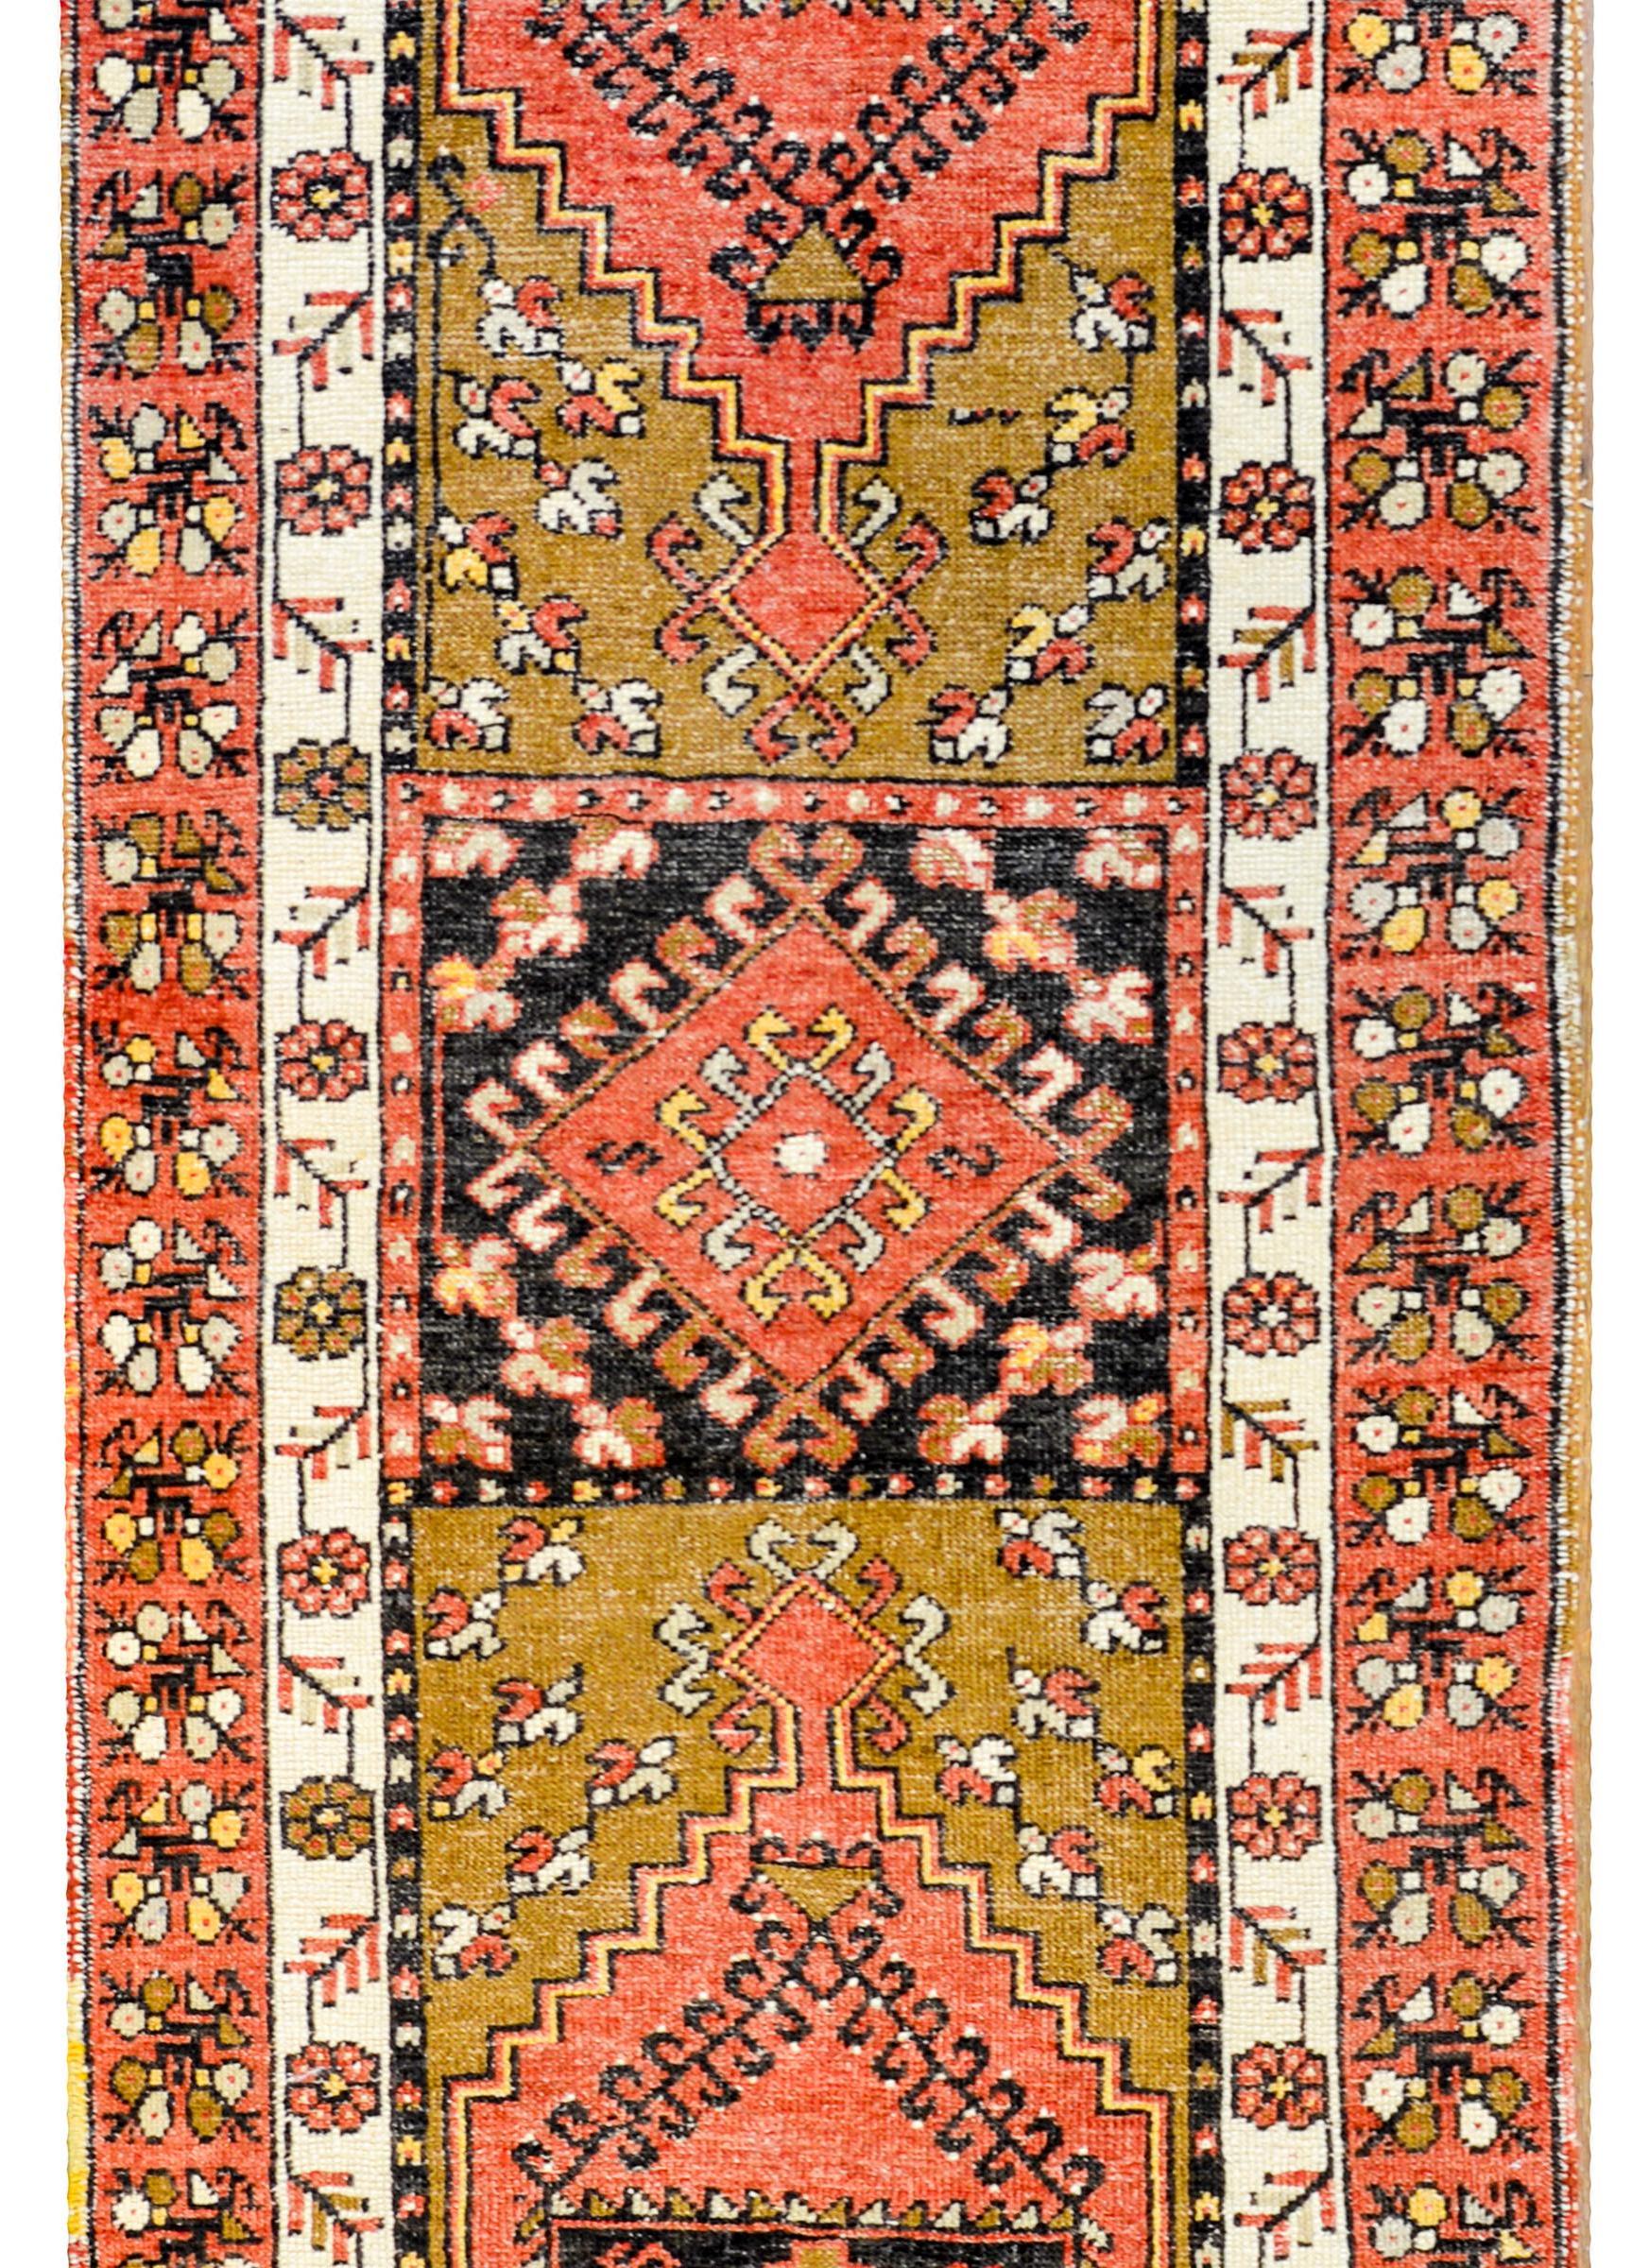 A gorgeous early 20th century Perisan Karajeh Heriz runner with a wonderful tribal pattern containing three large diamond patterned medallions woven in black, coral, white, and camel colored wool. The border is complex with three distinct patterns.